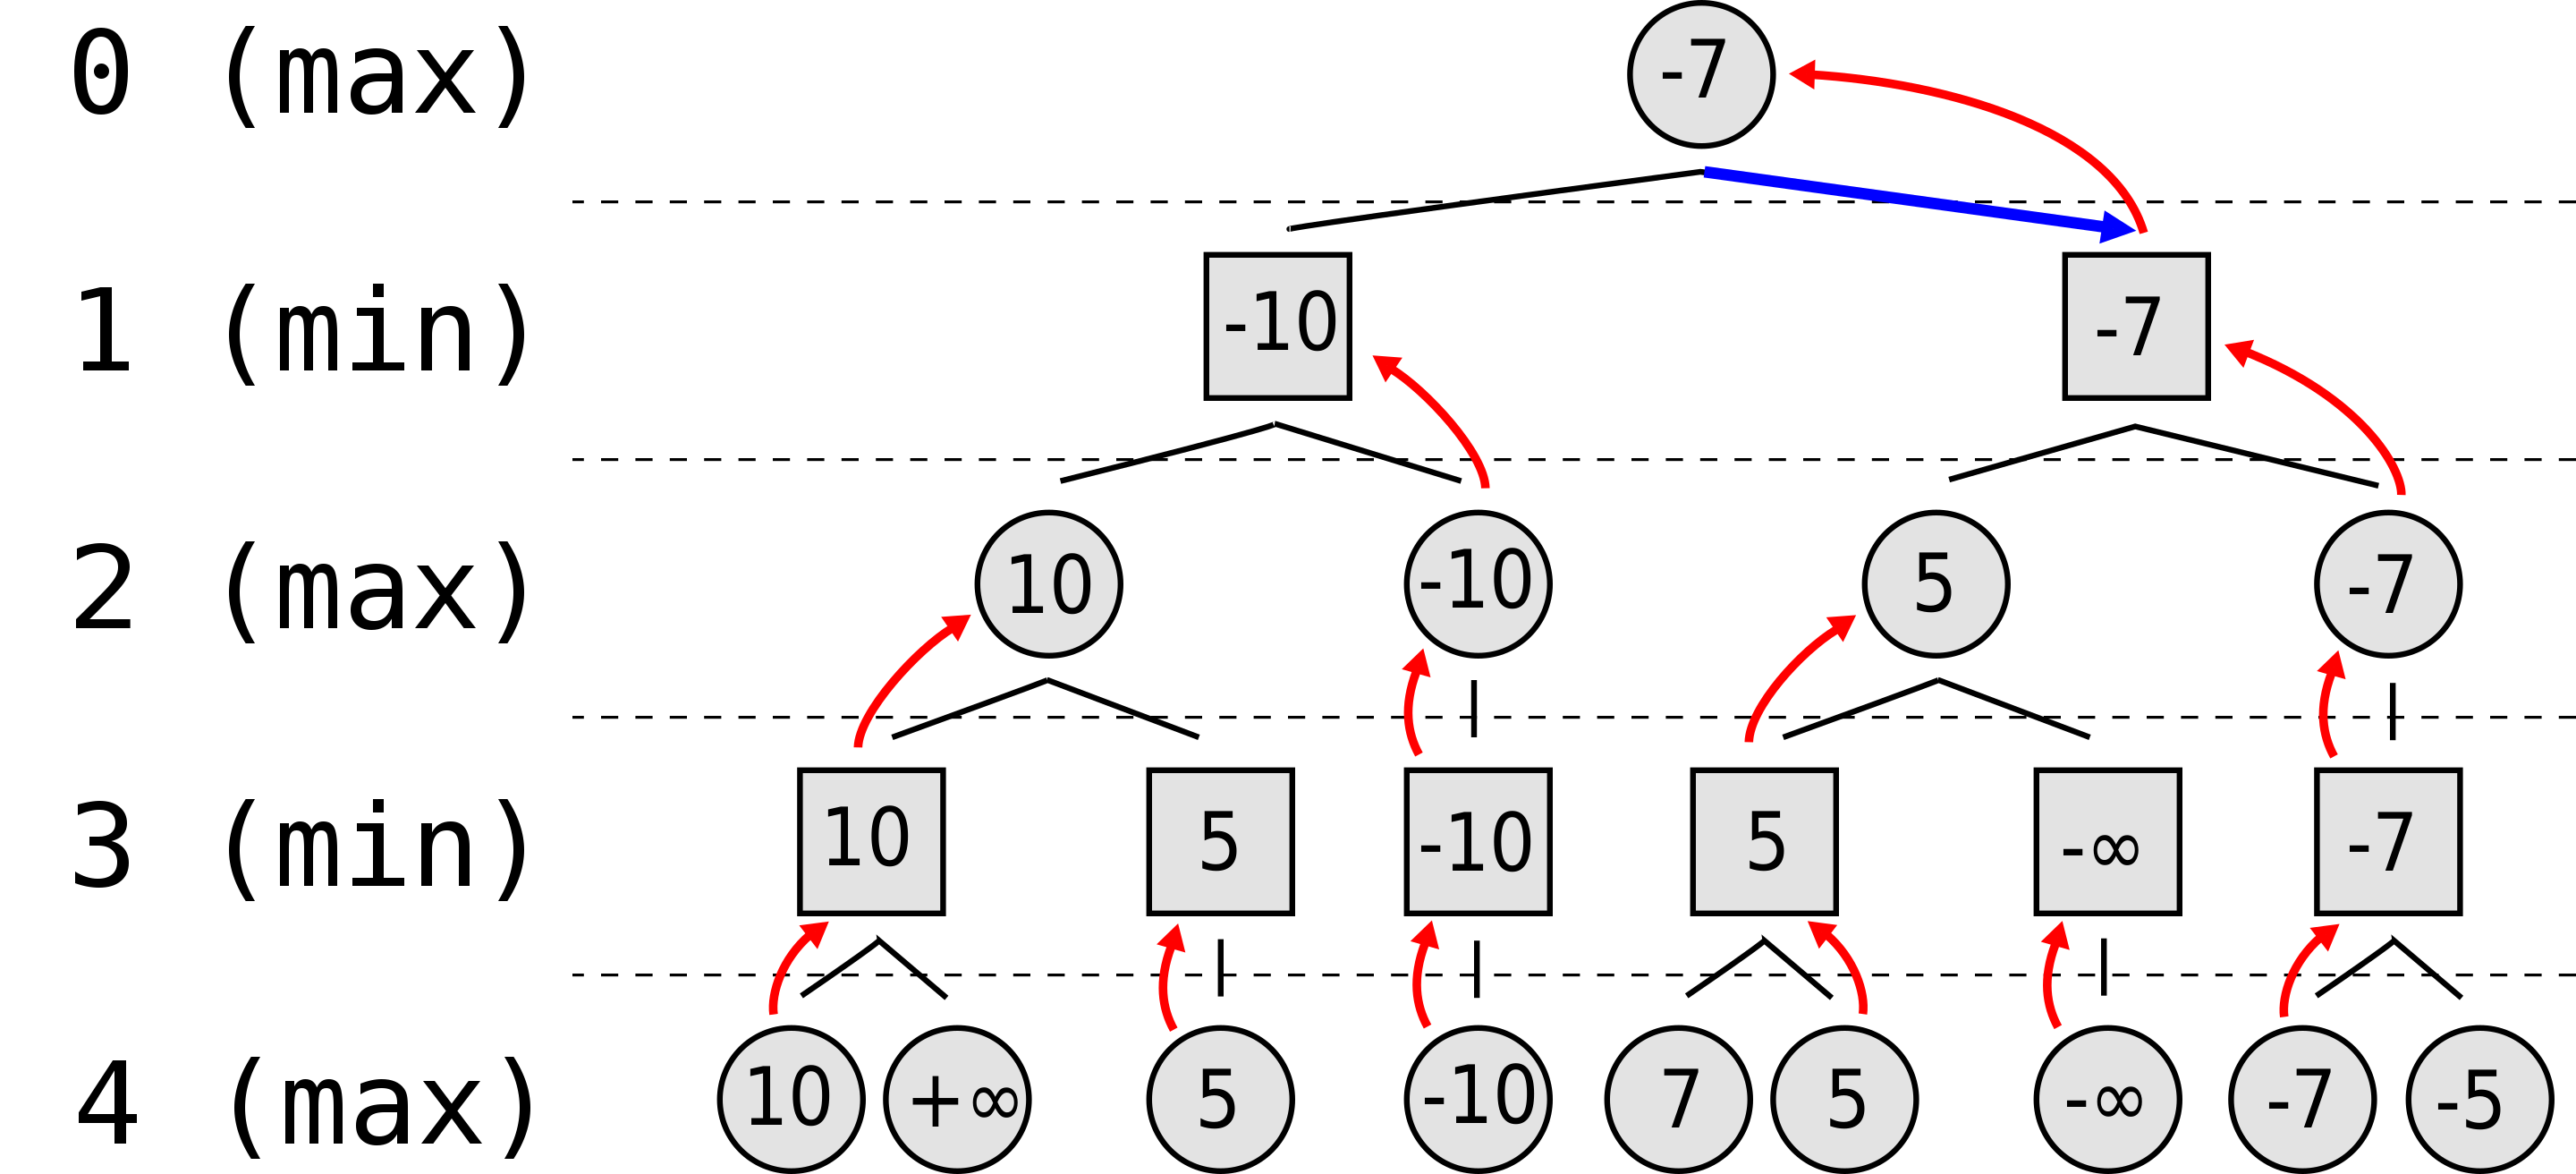 The neural network of the Stockfish chess engine